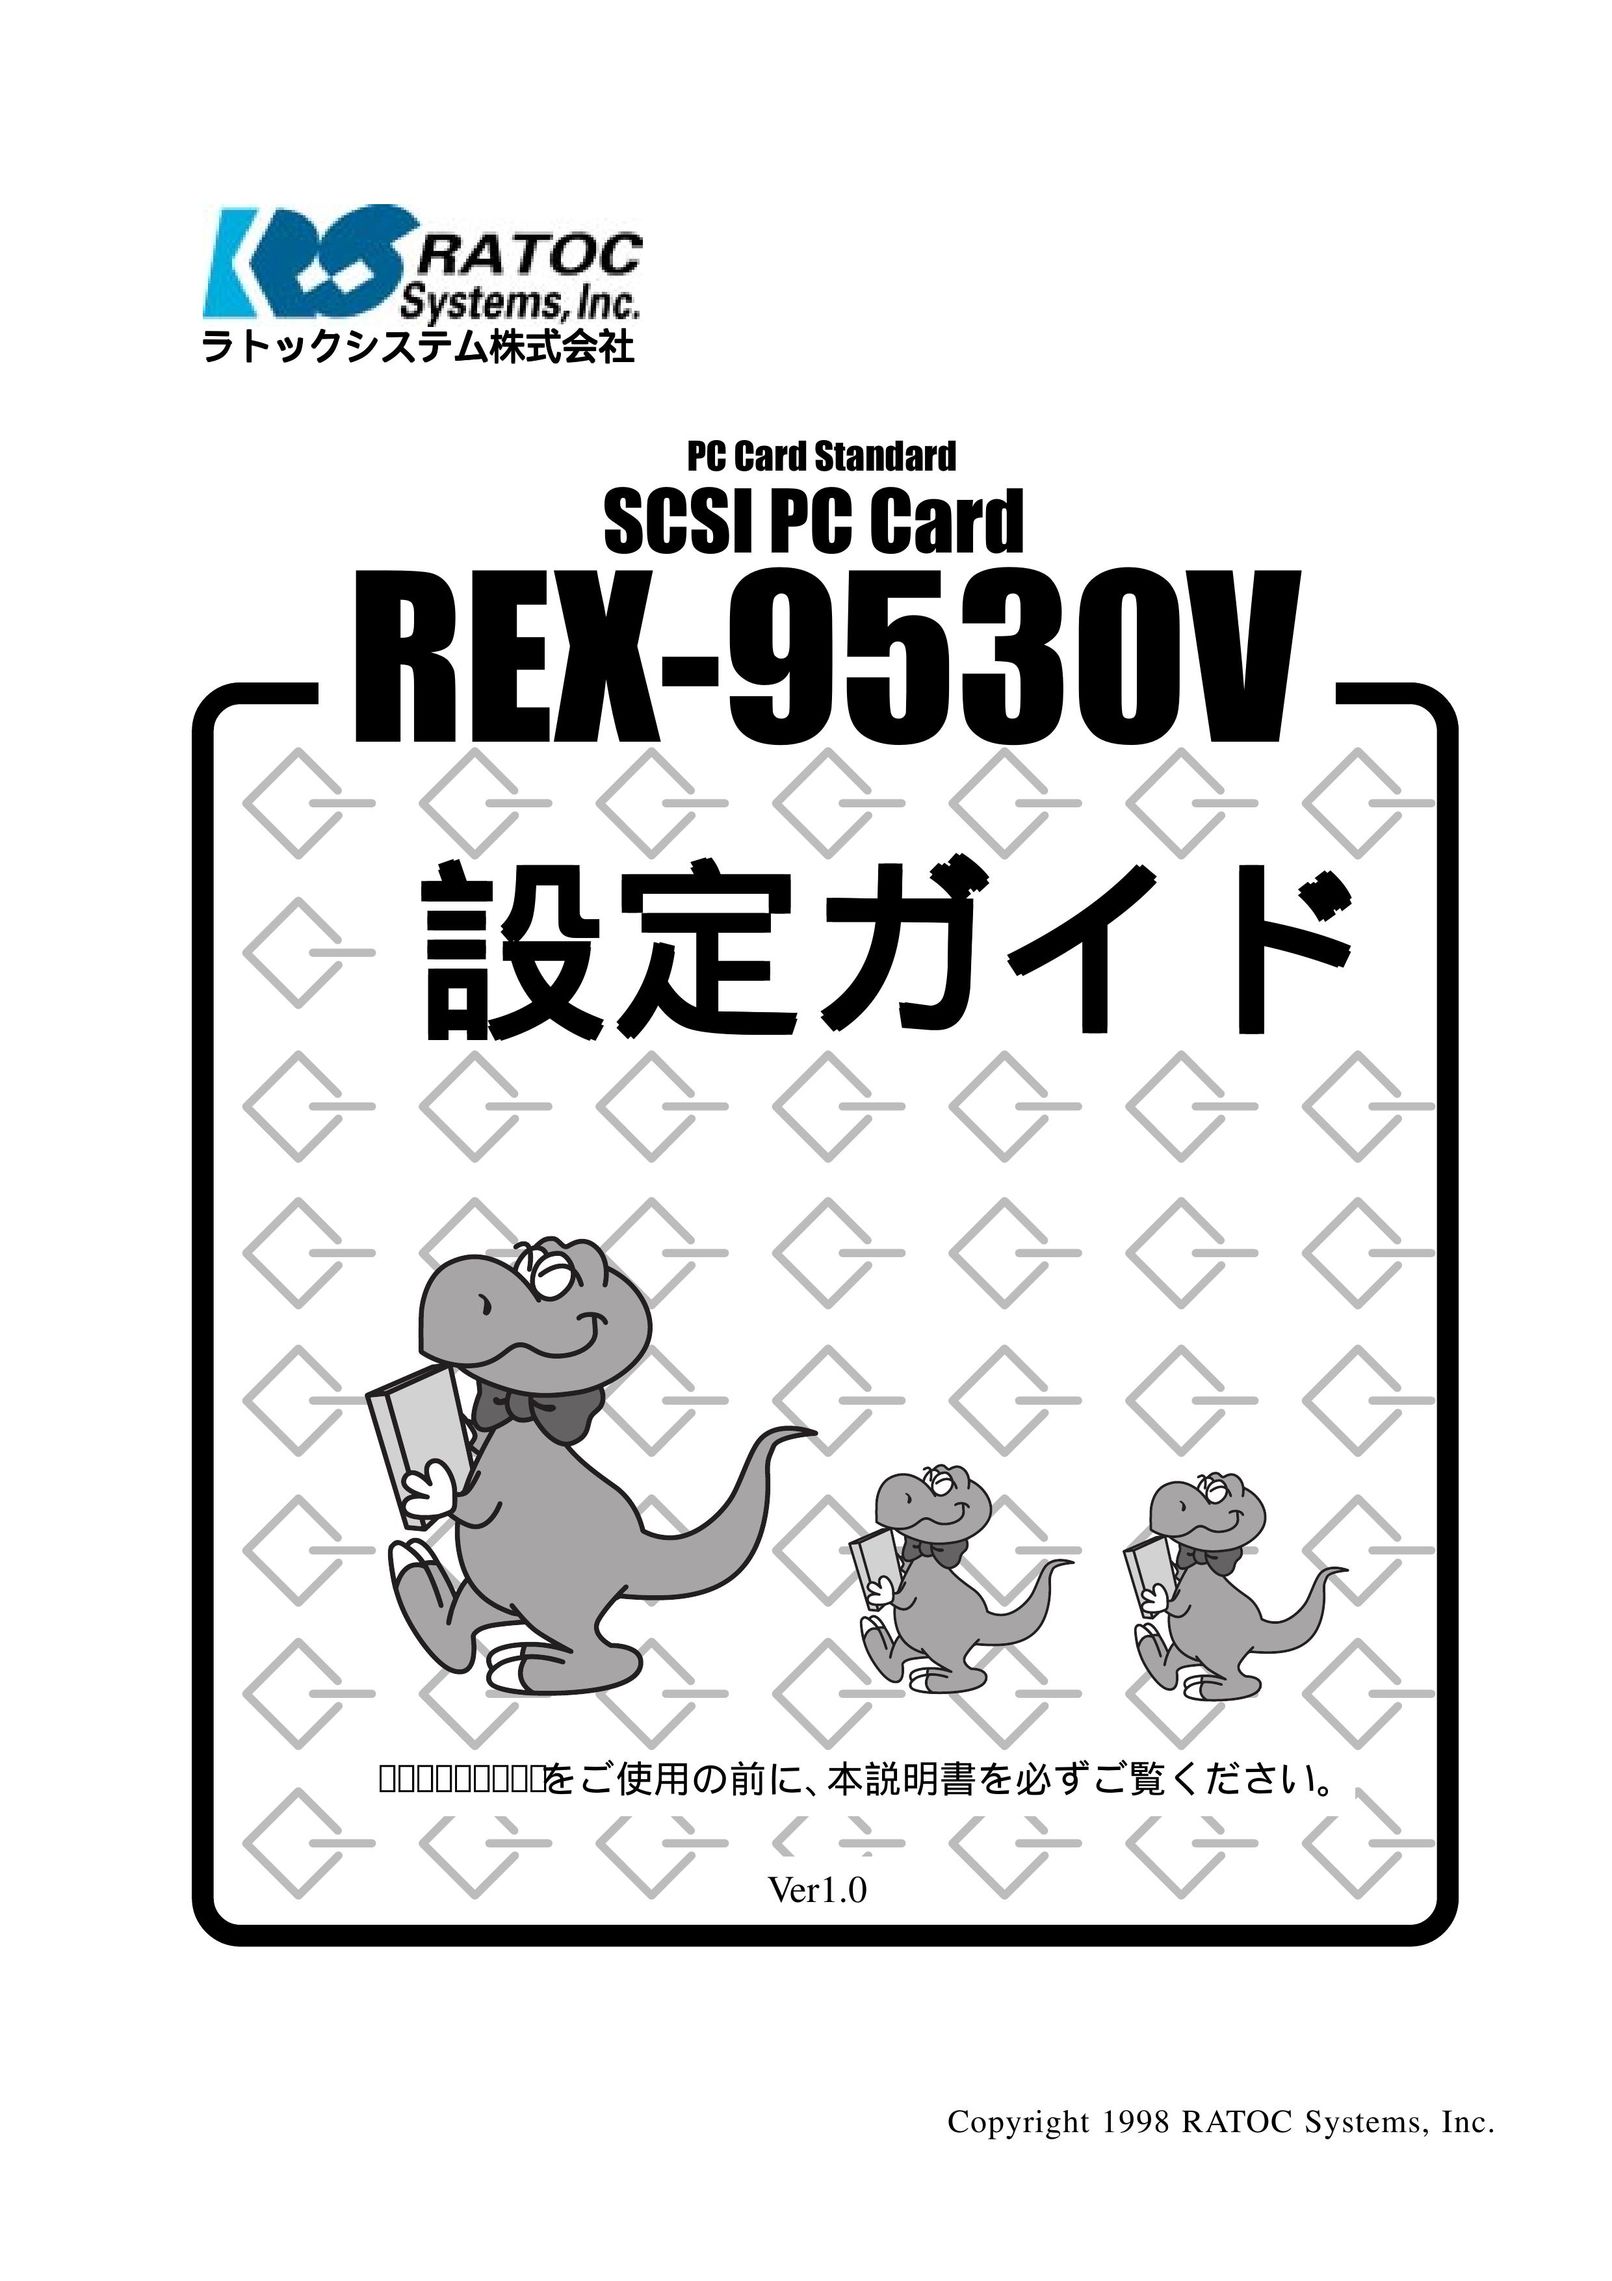 Ratoc Systems REX-9530V Network Card User Manual